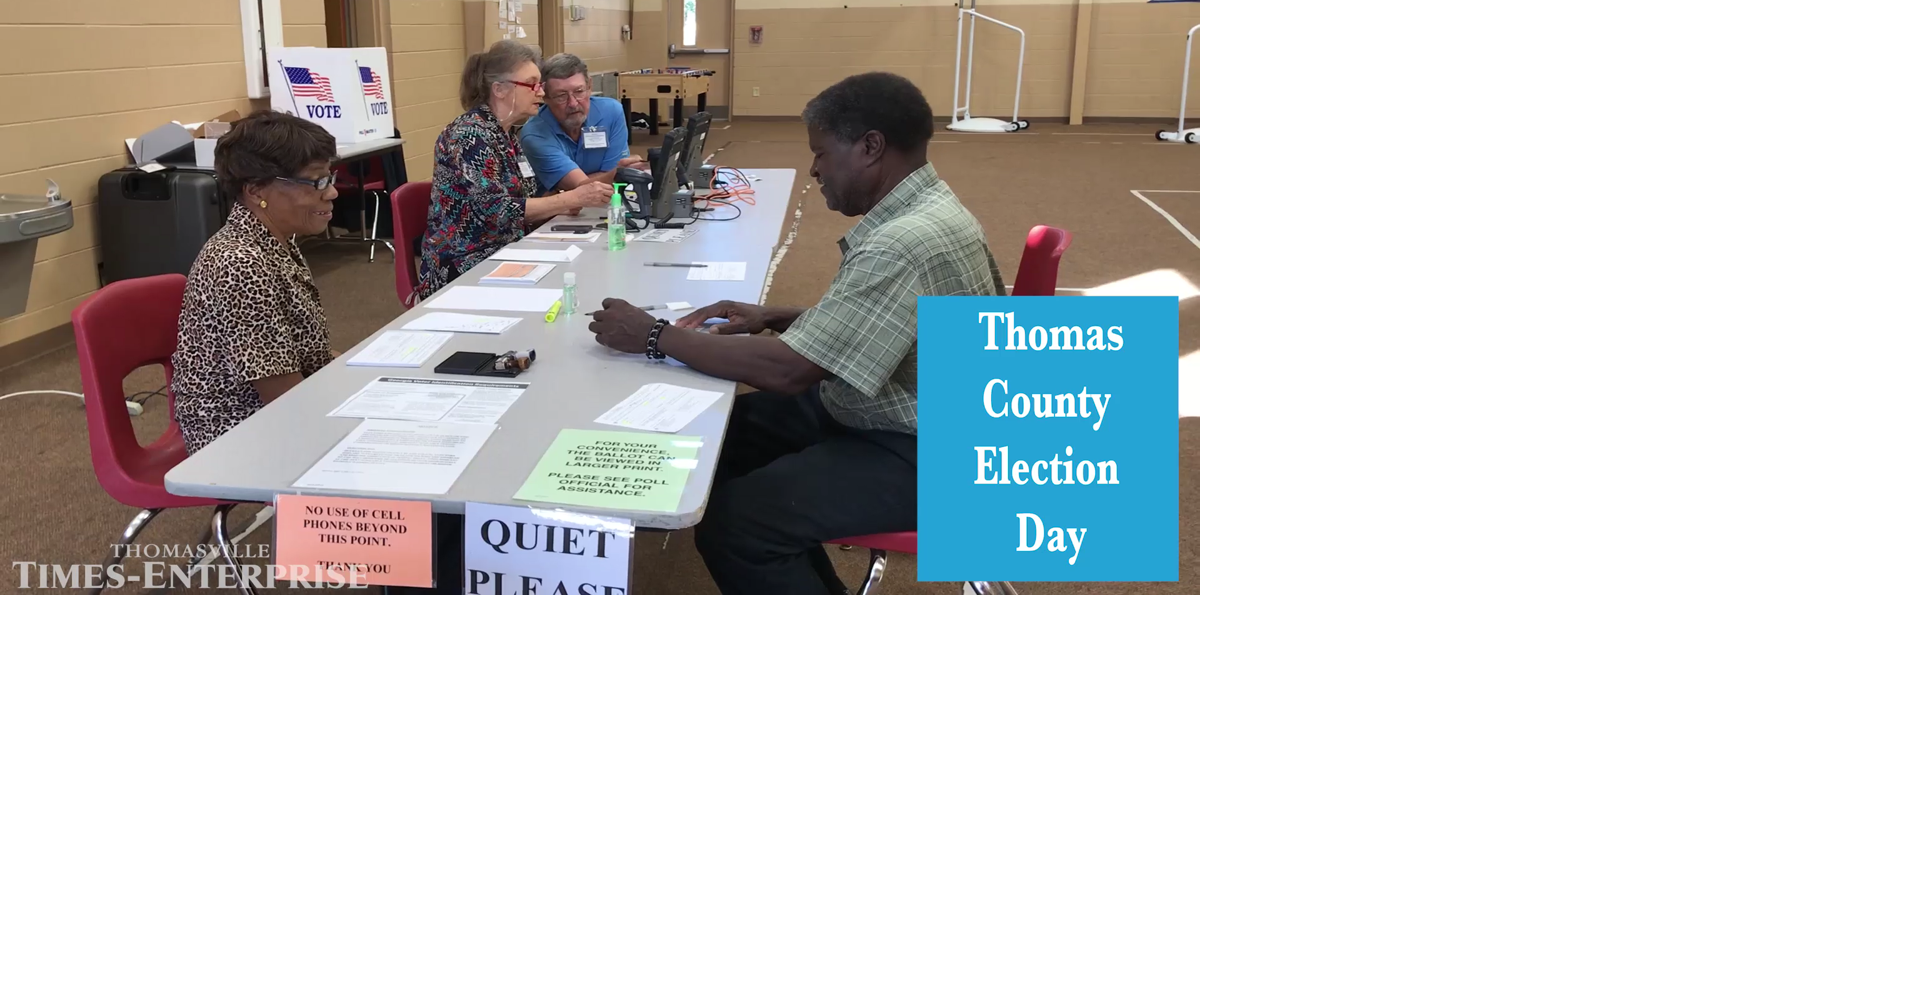 Thomas County Election Day Local News